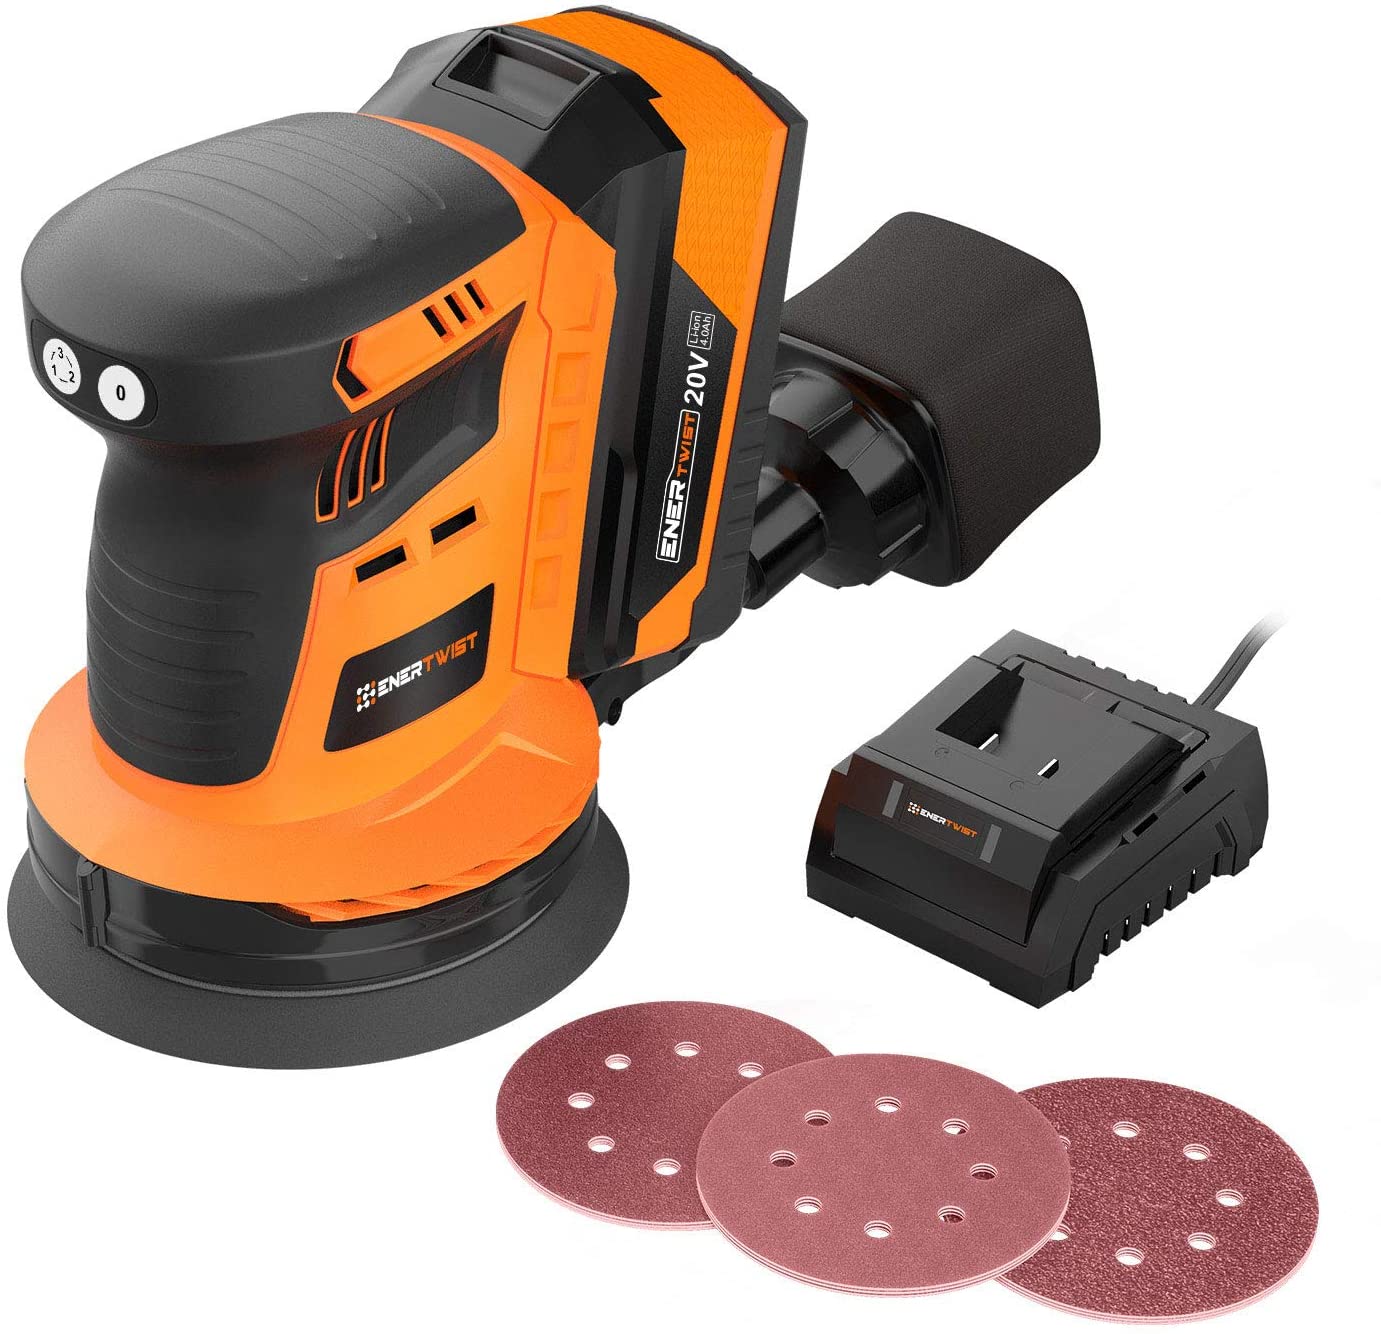 Enertwist Cordless Orbital Sander, 20V Max 5-Inch Brushless Random Orbit Sander with 4.0Ah Lithium-ion Battery and Charger, Including Dust Bag and 9-Pieces Hook-and-Loop Sanding Pads, ET-OS-20BL